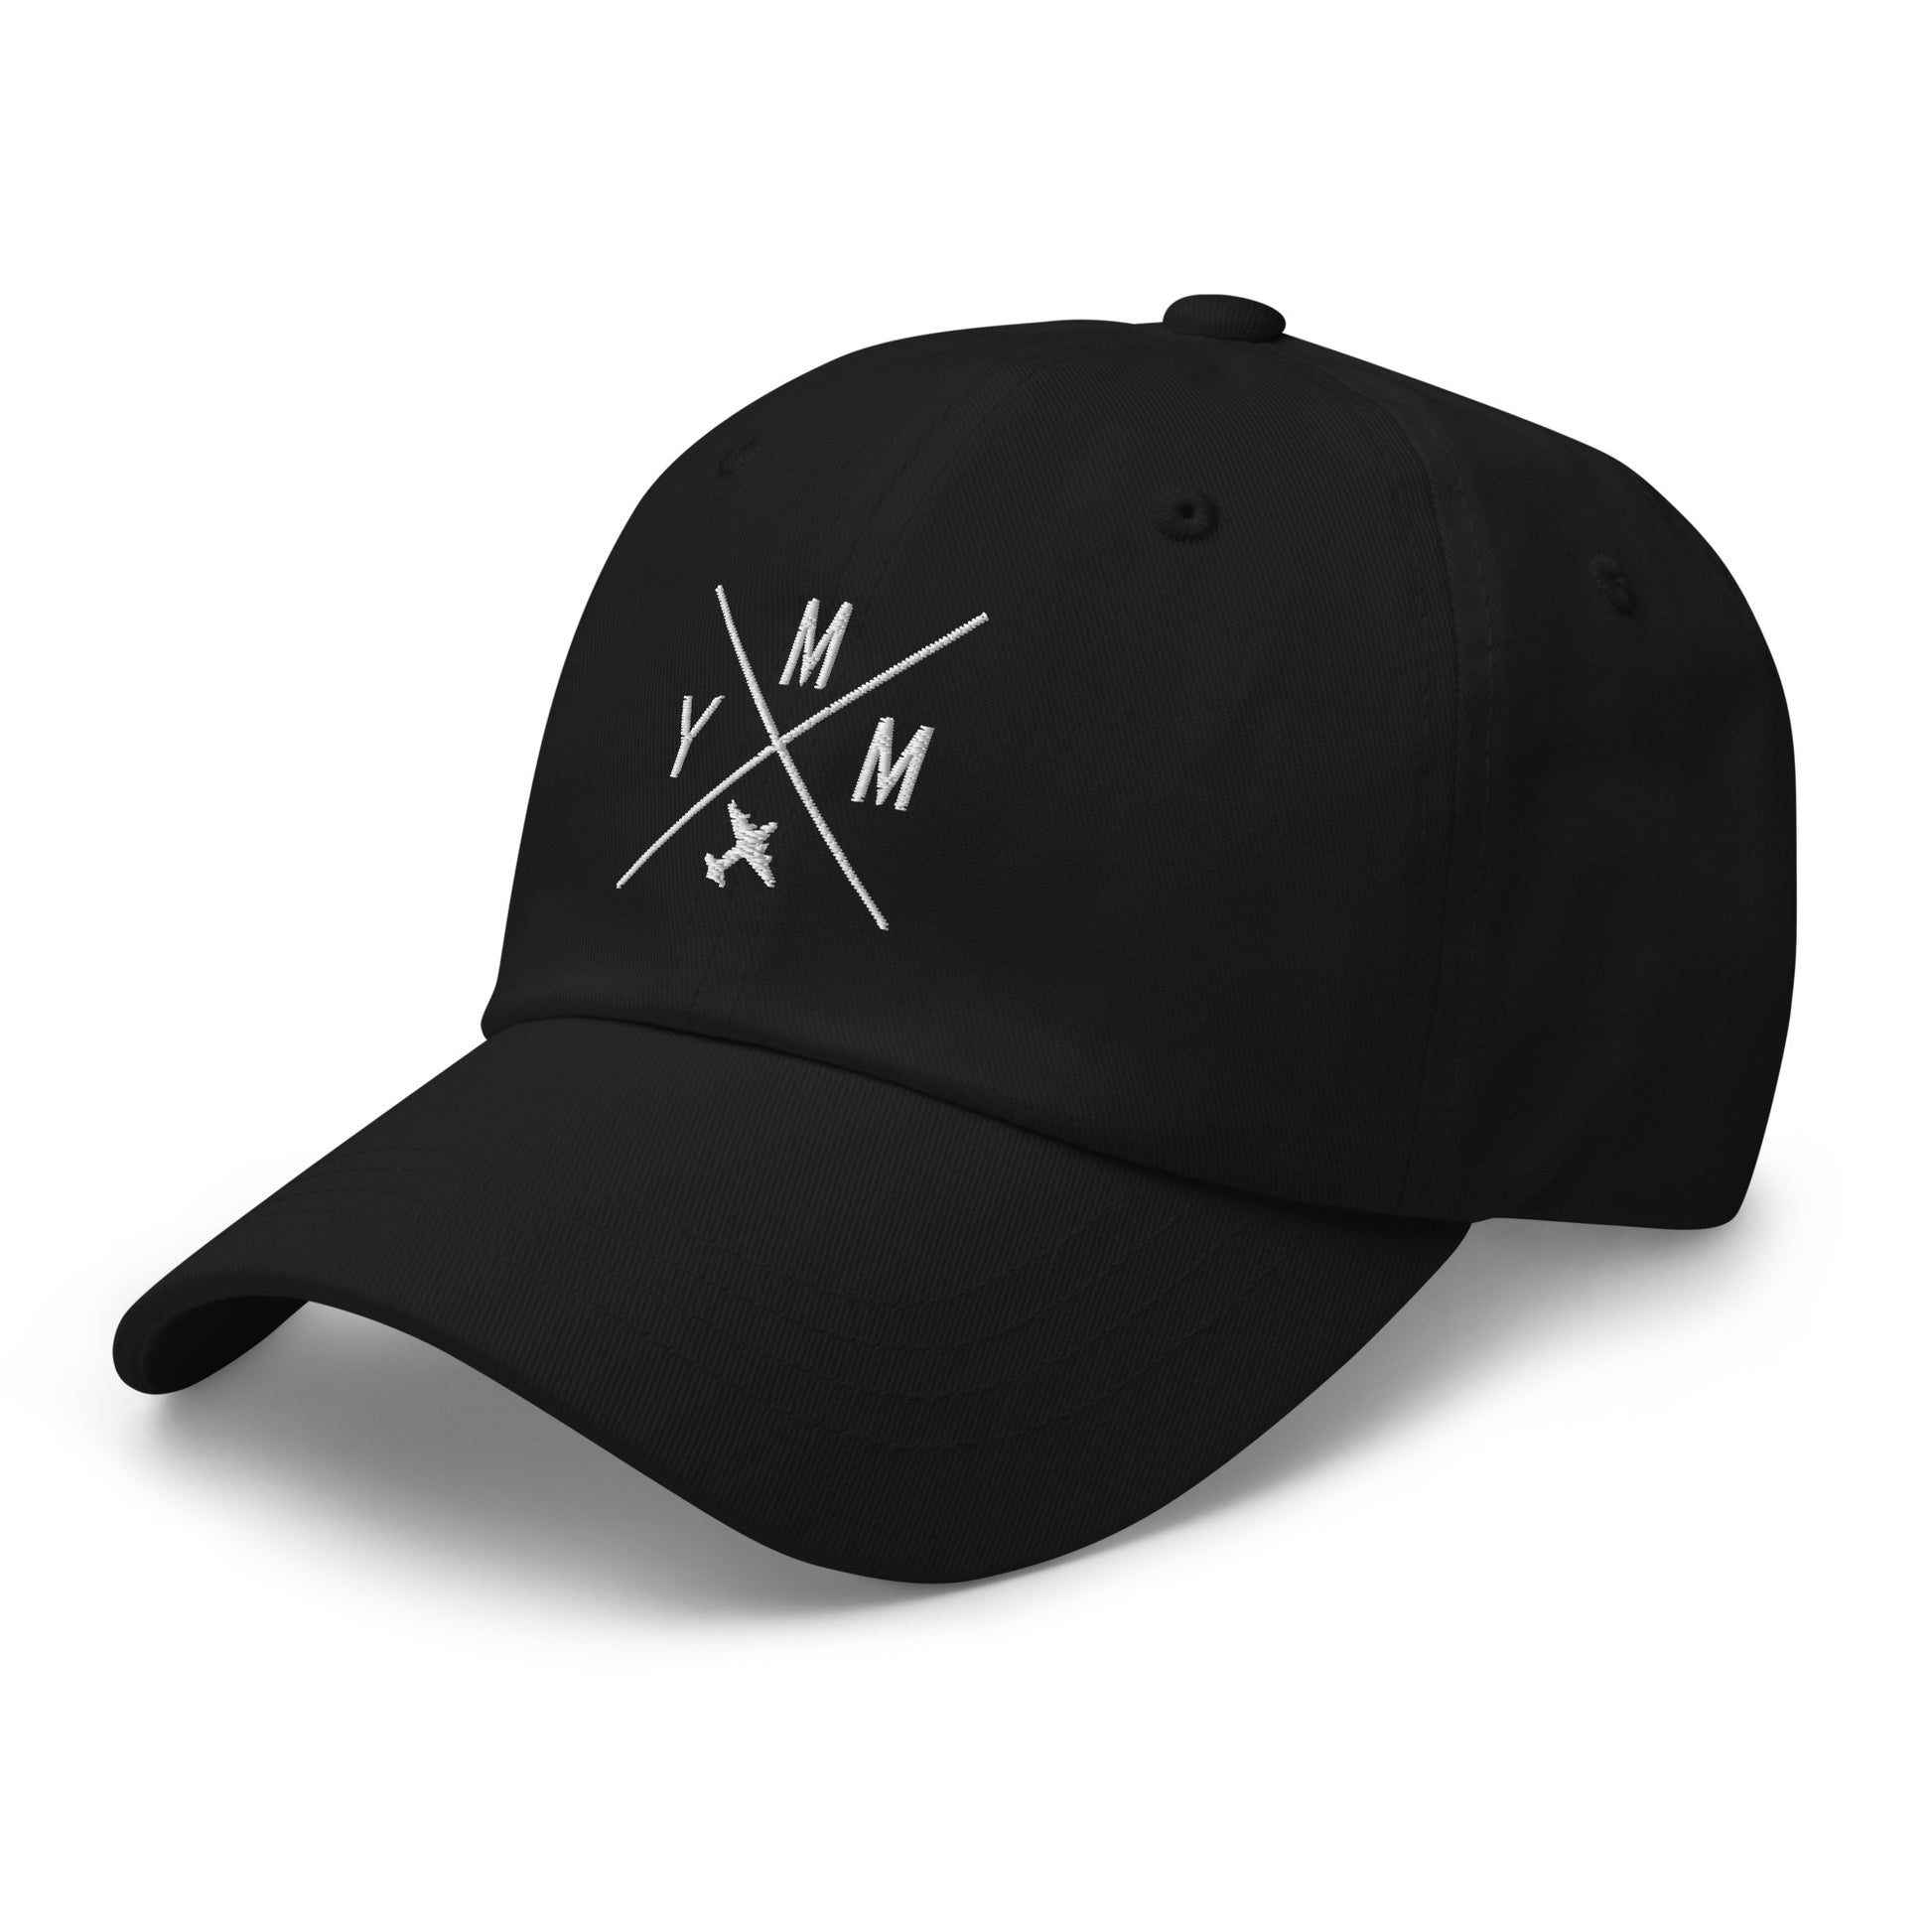 Crossed-X Dad Hat - White • YMM Fort McMurray • YHM Designs - Image 12